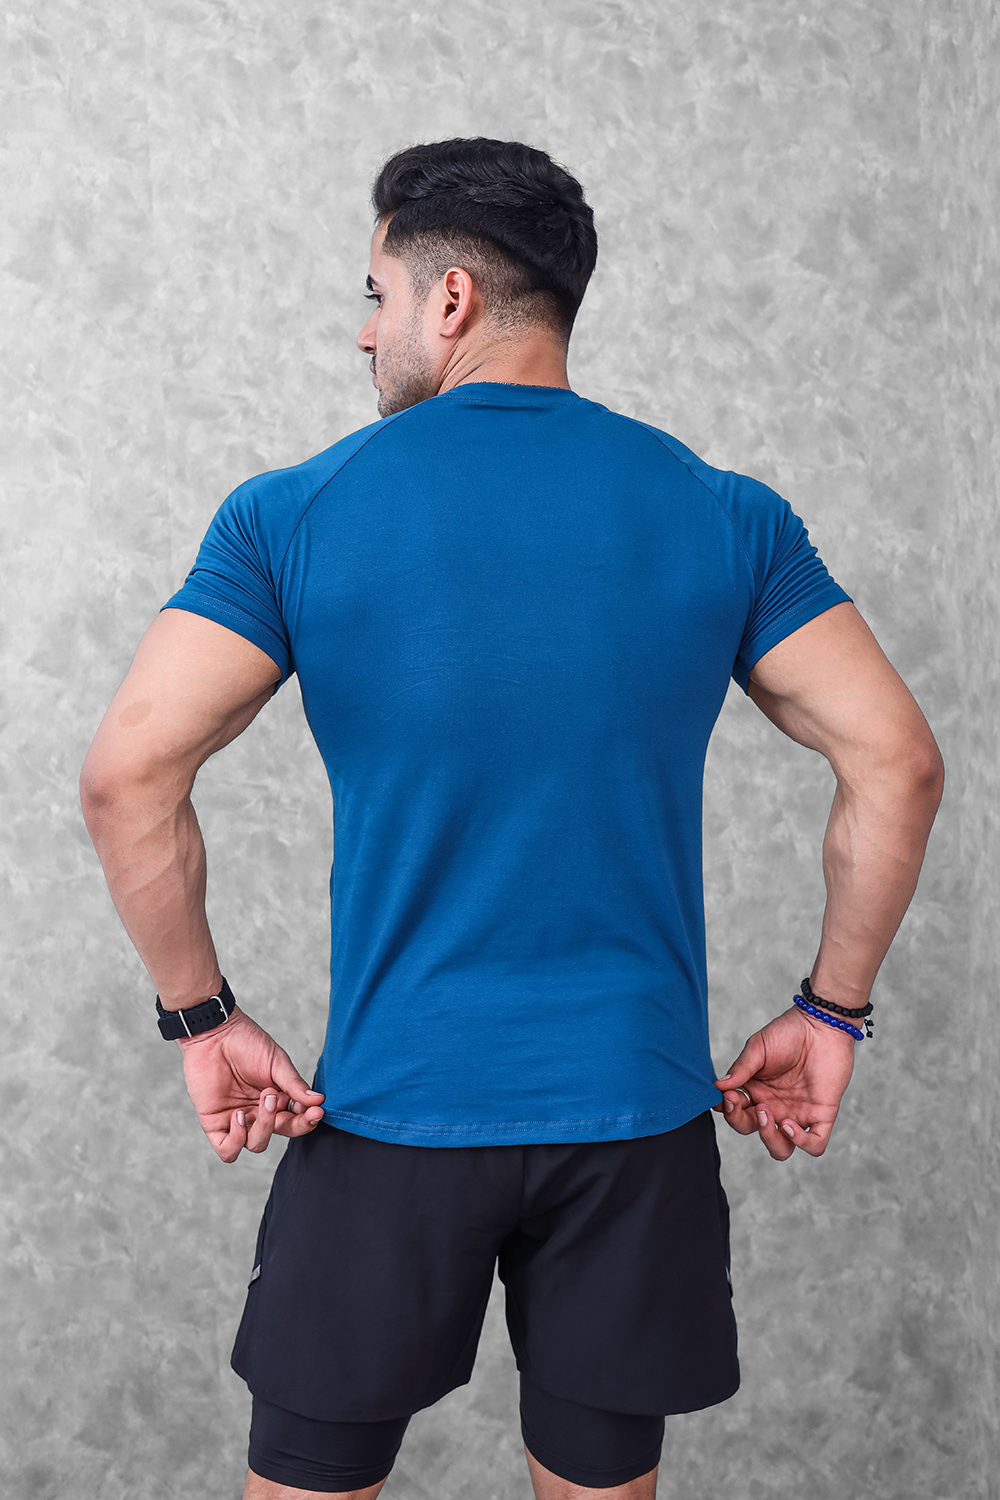 Buy Gym Tshirt Online for Men at Best Price in India: New Theory